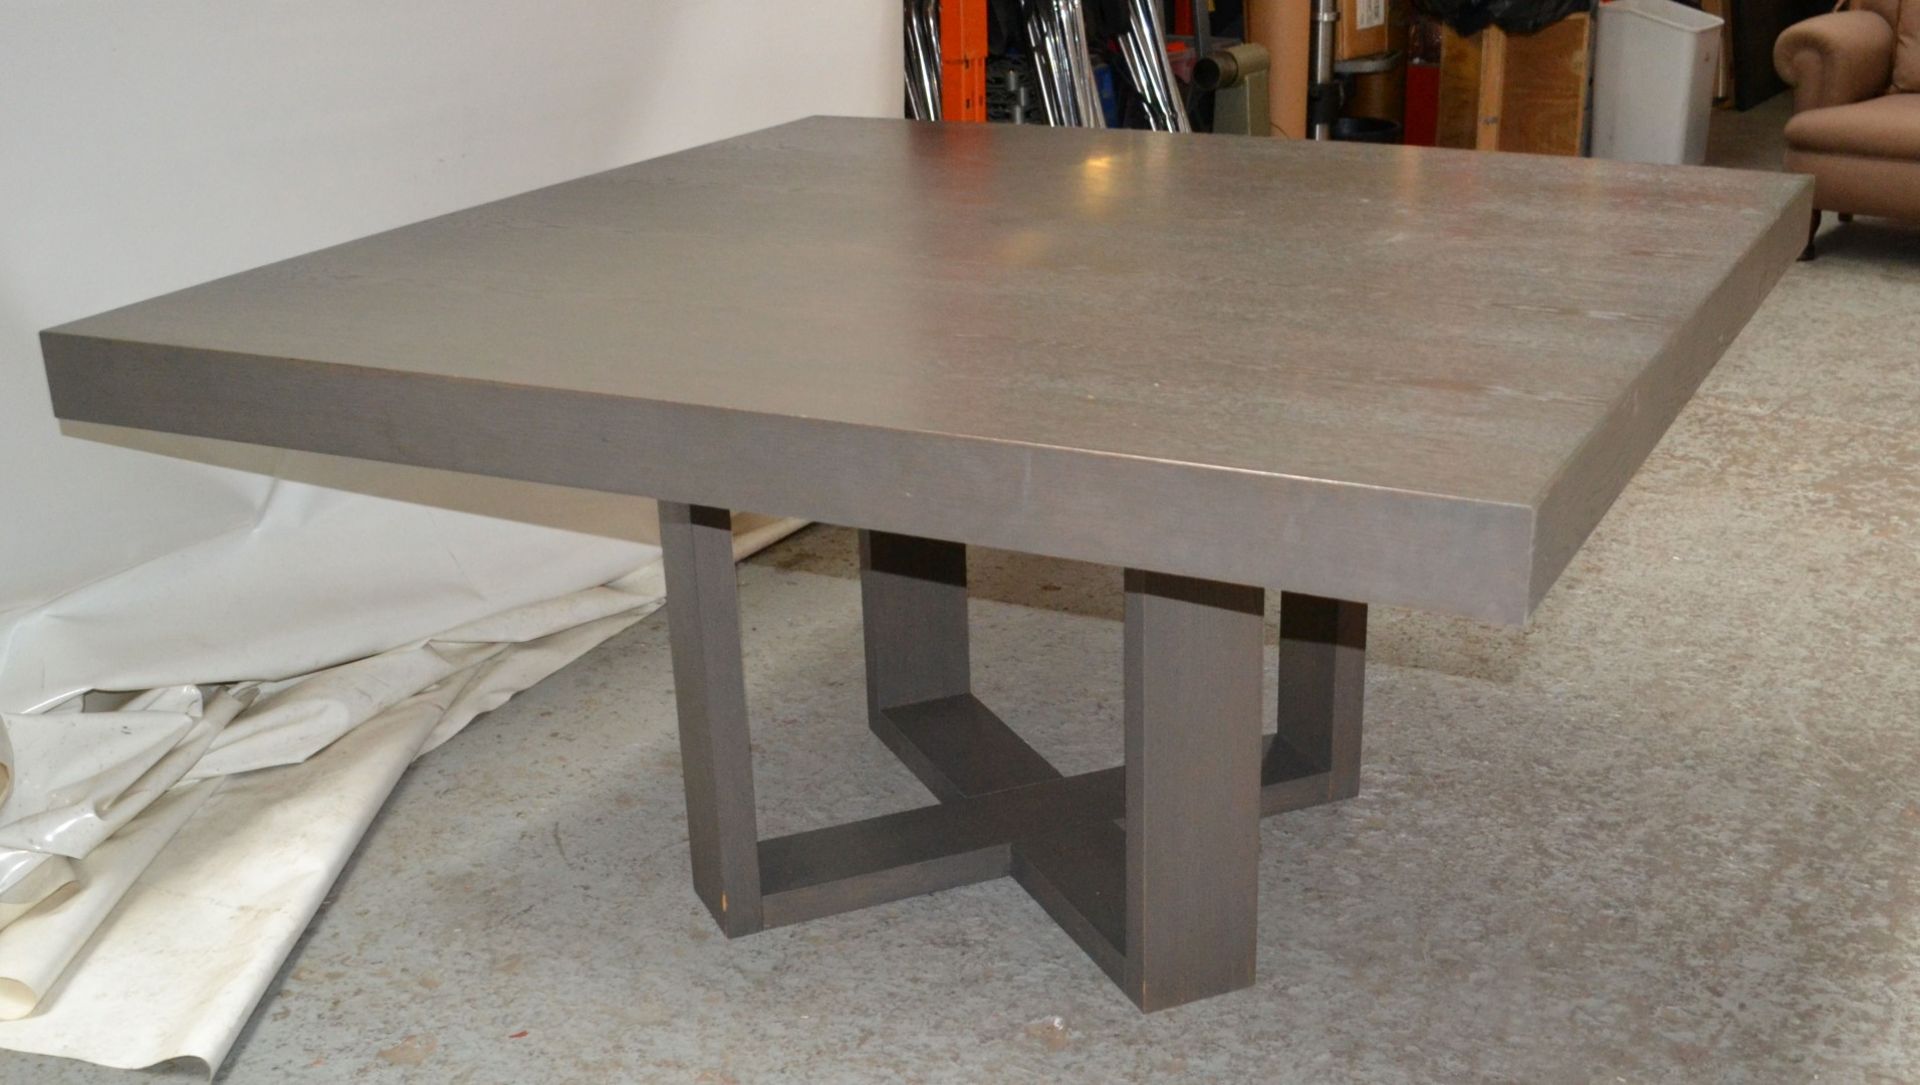 1 x Large Square Wooden Dining Table in a Grey Oak Coloured Finish - CL314 - Location: Altrincham - Image 4 of 10